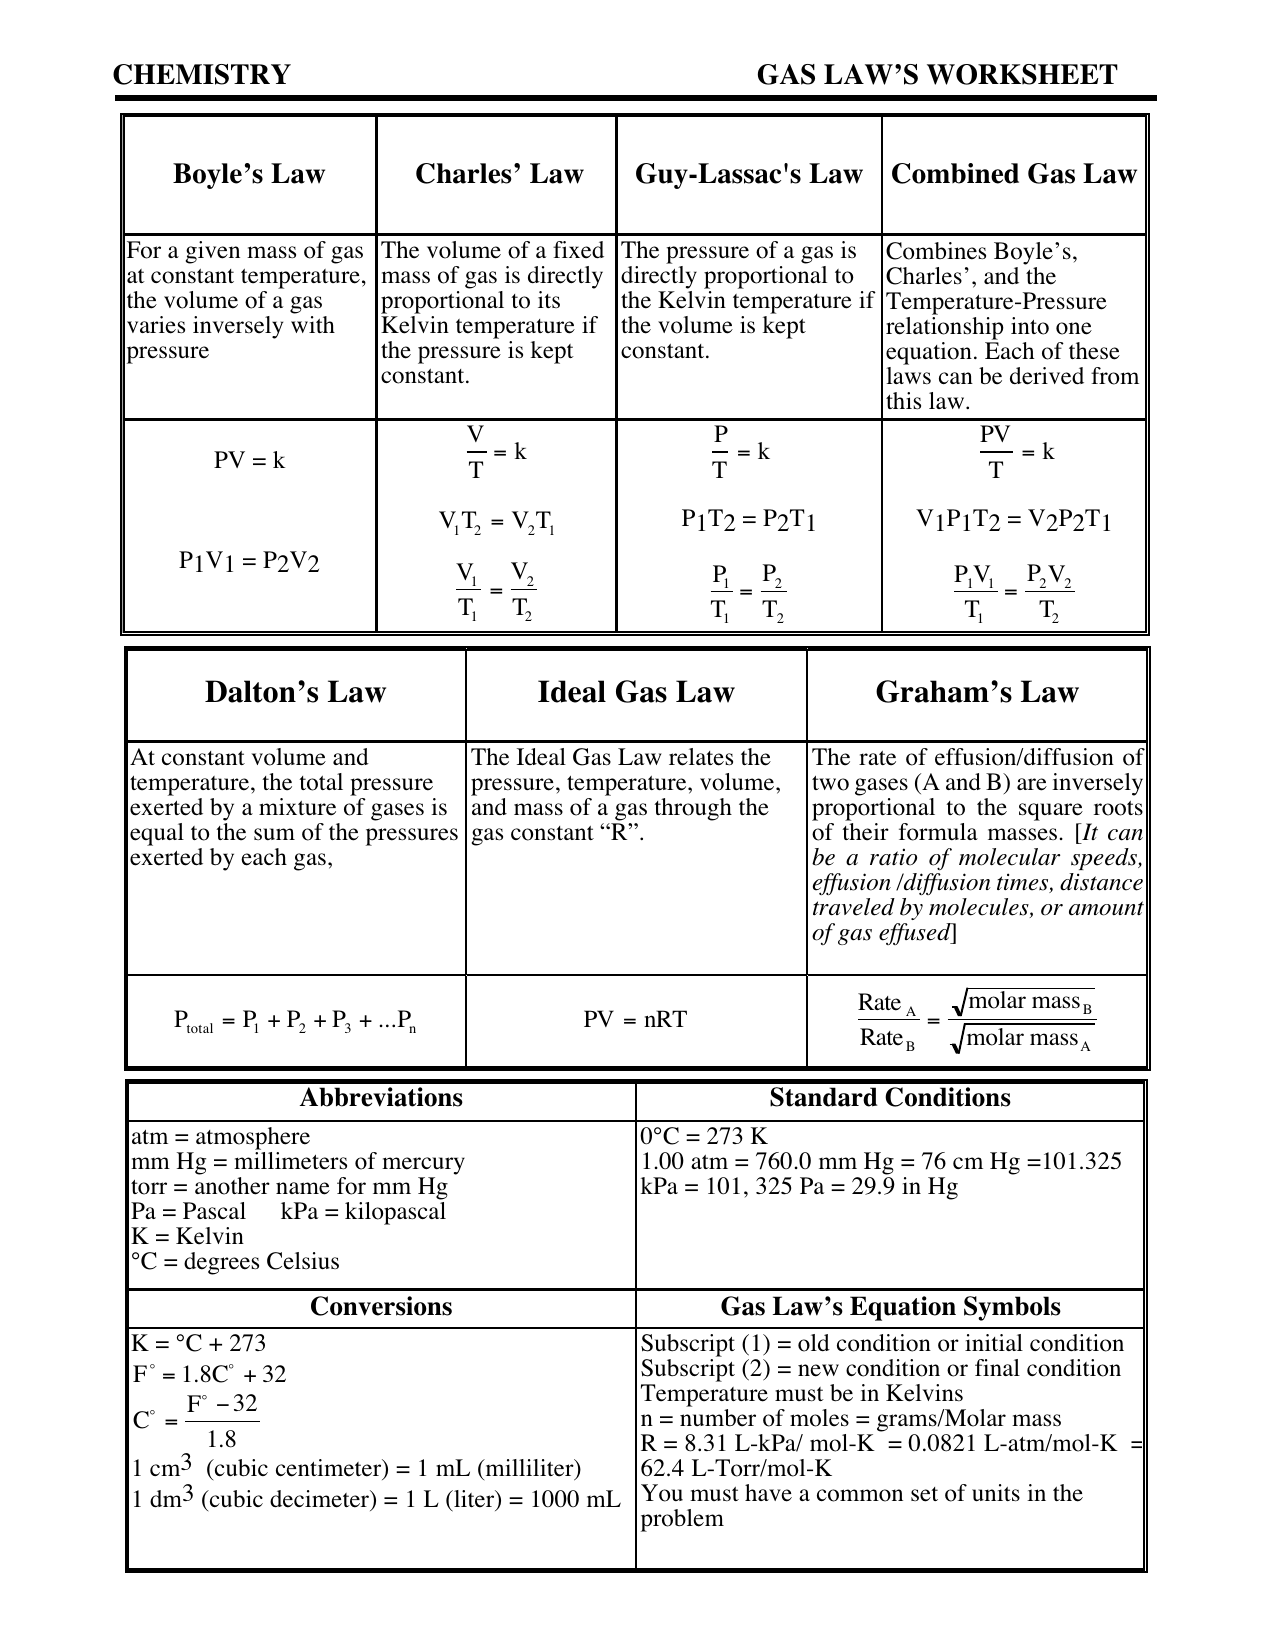 gas-laws-ws